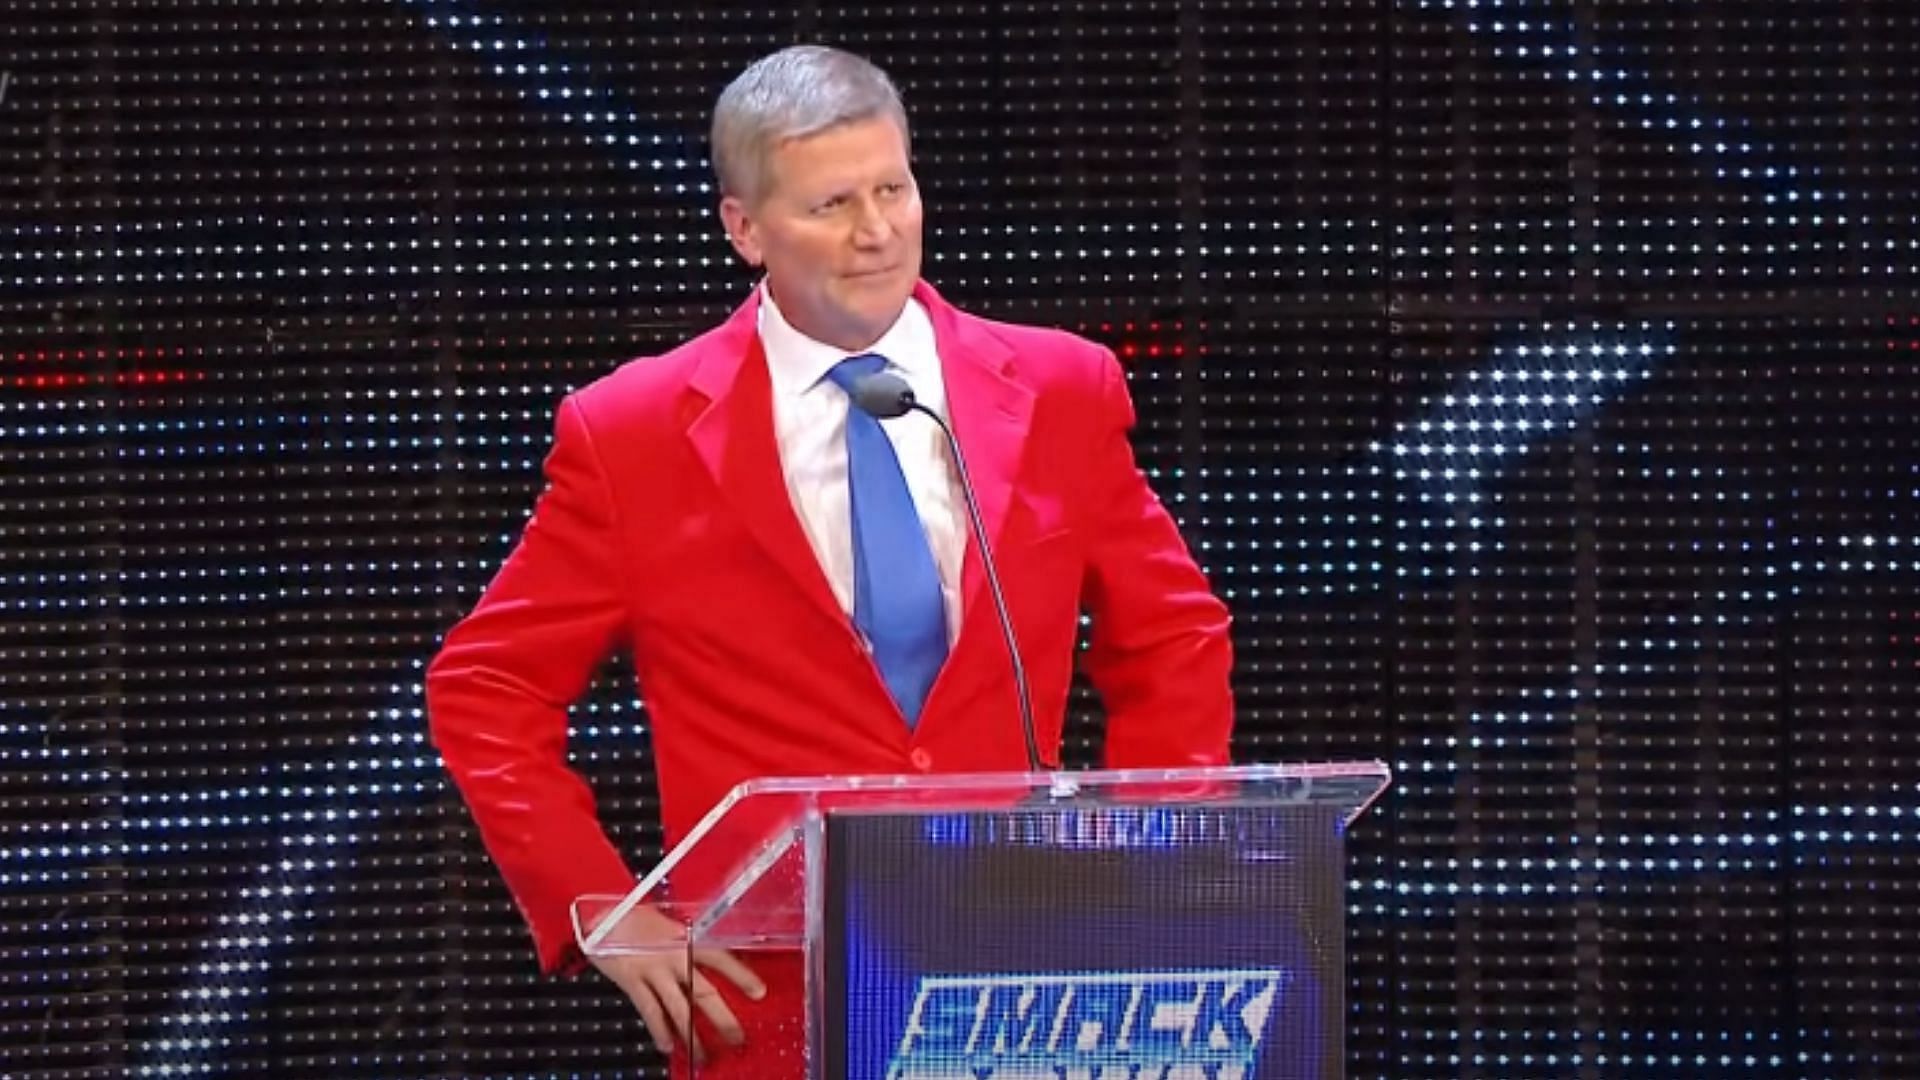 John Laurinaitis was the Head of Talent Relations